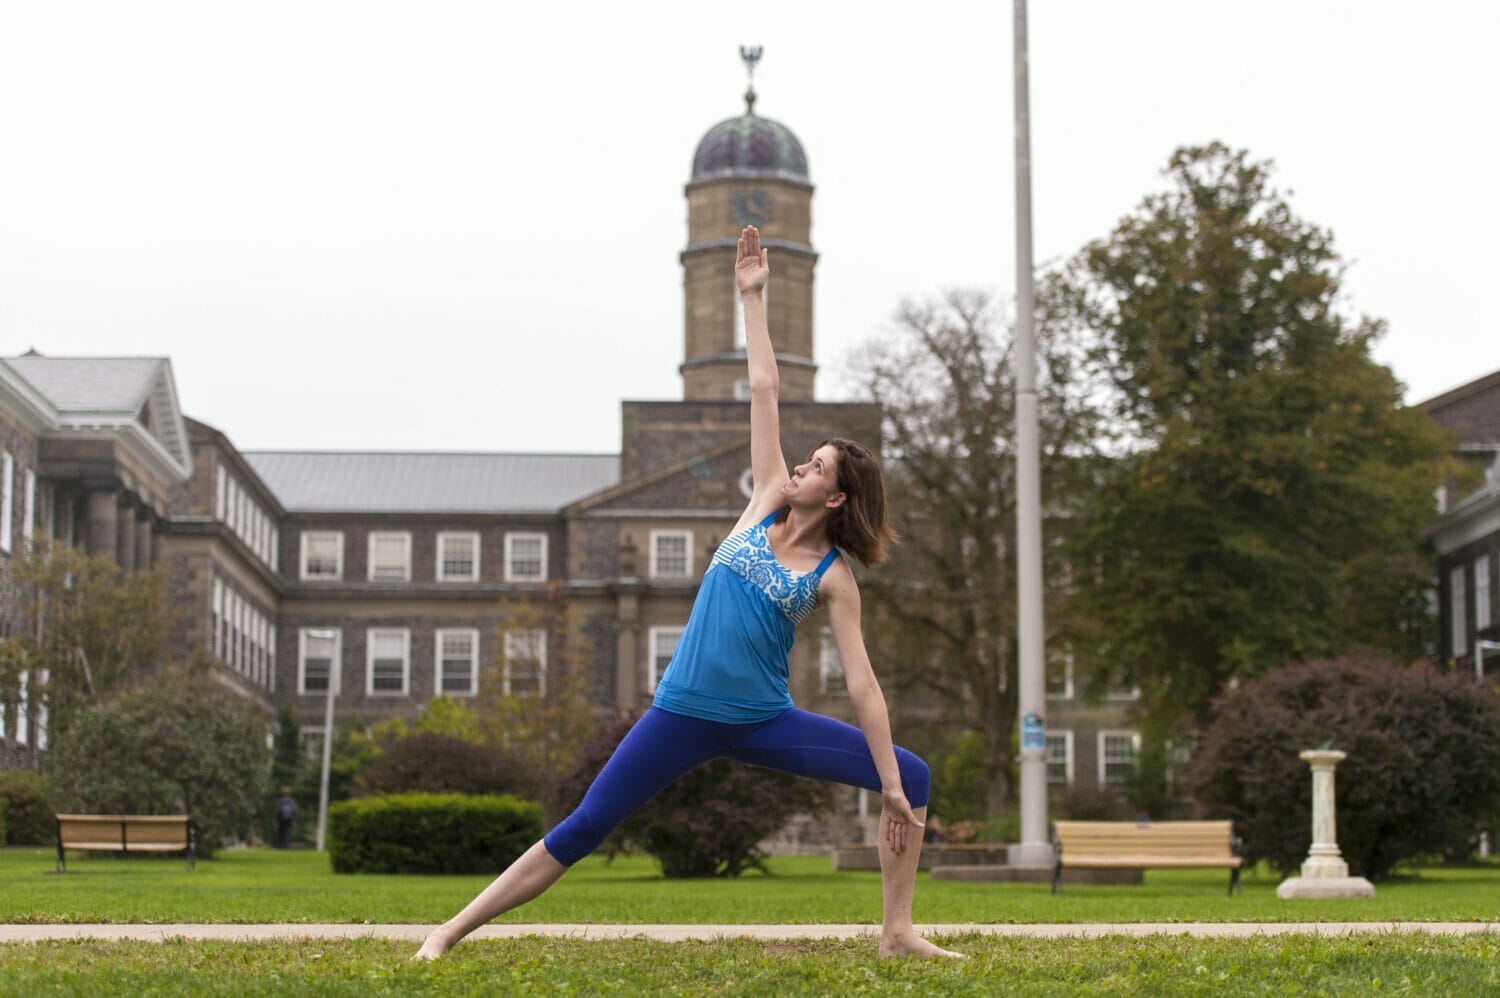 Want to learn about yoga? Just ask Abby. (photo by Chris Parent)